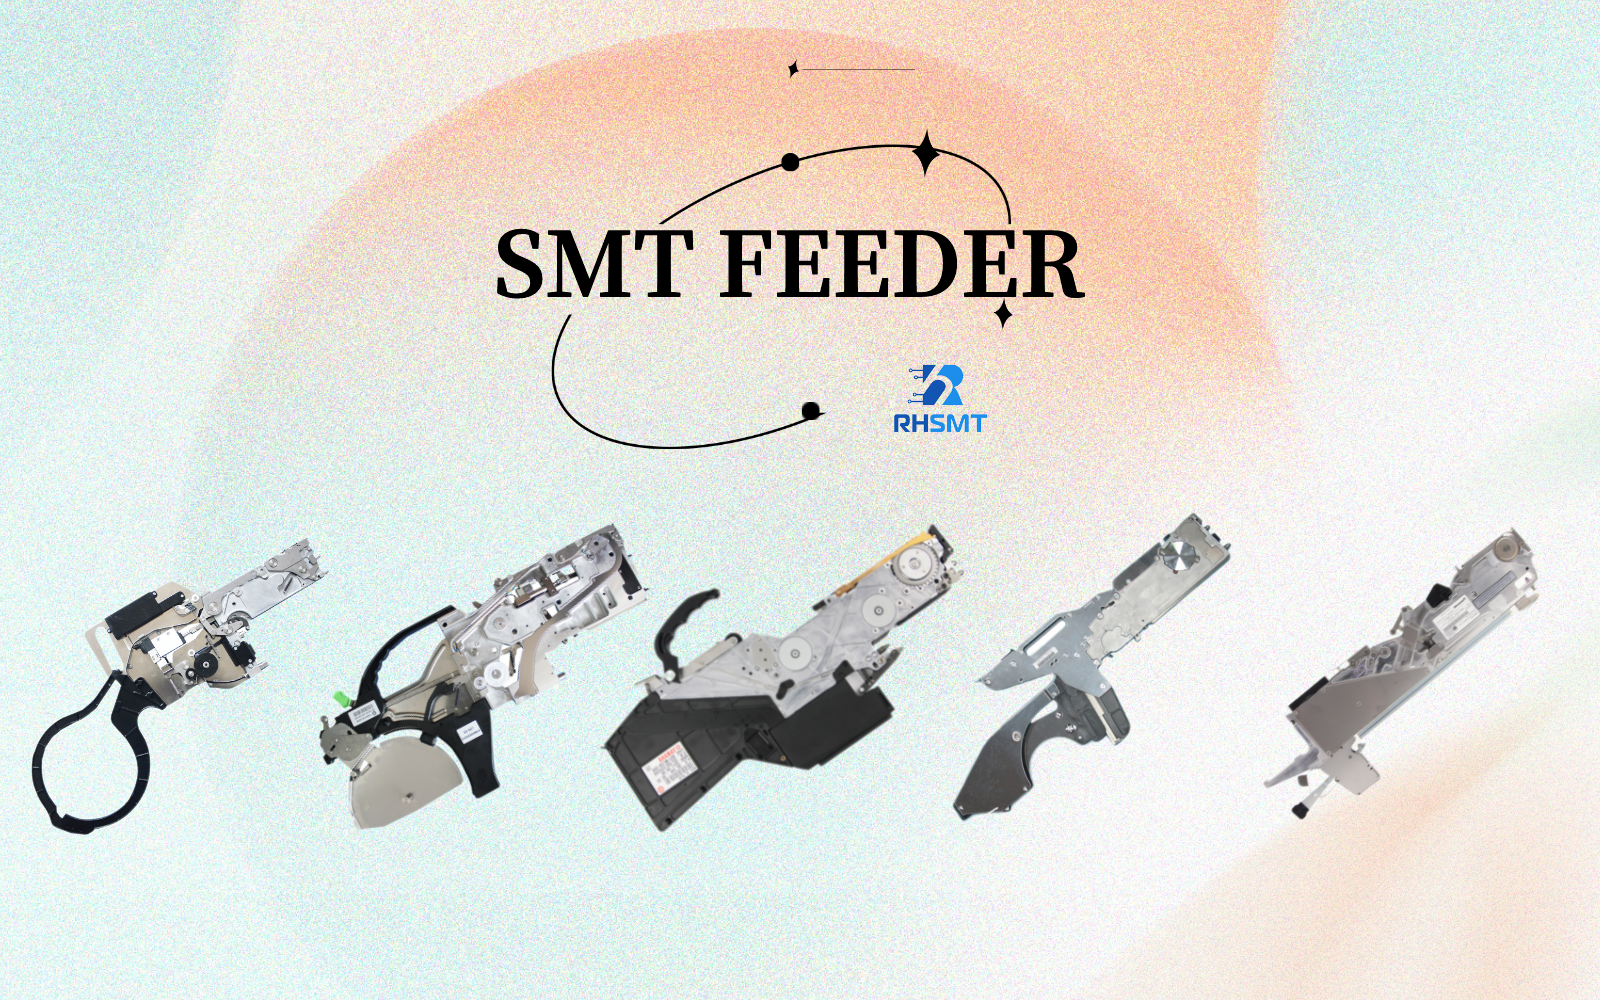 What Is A SMT Feeder?